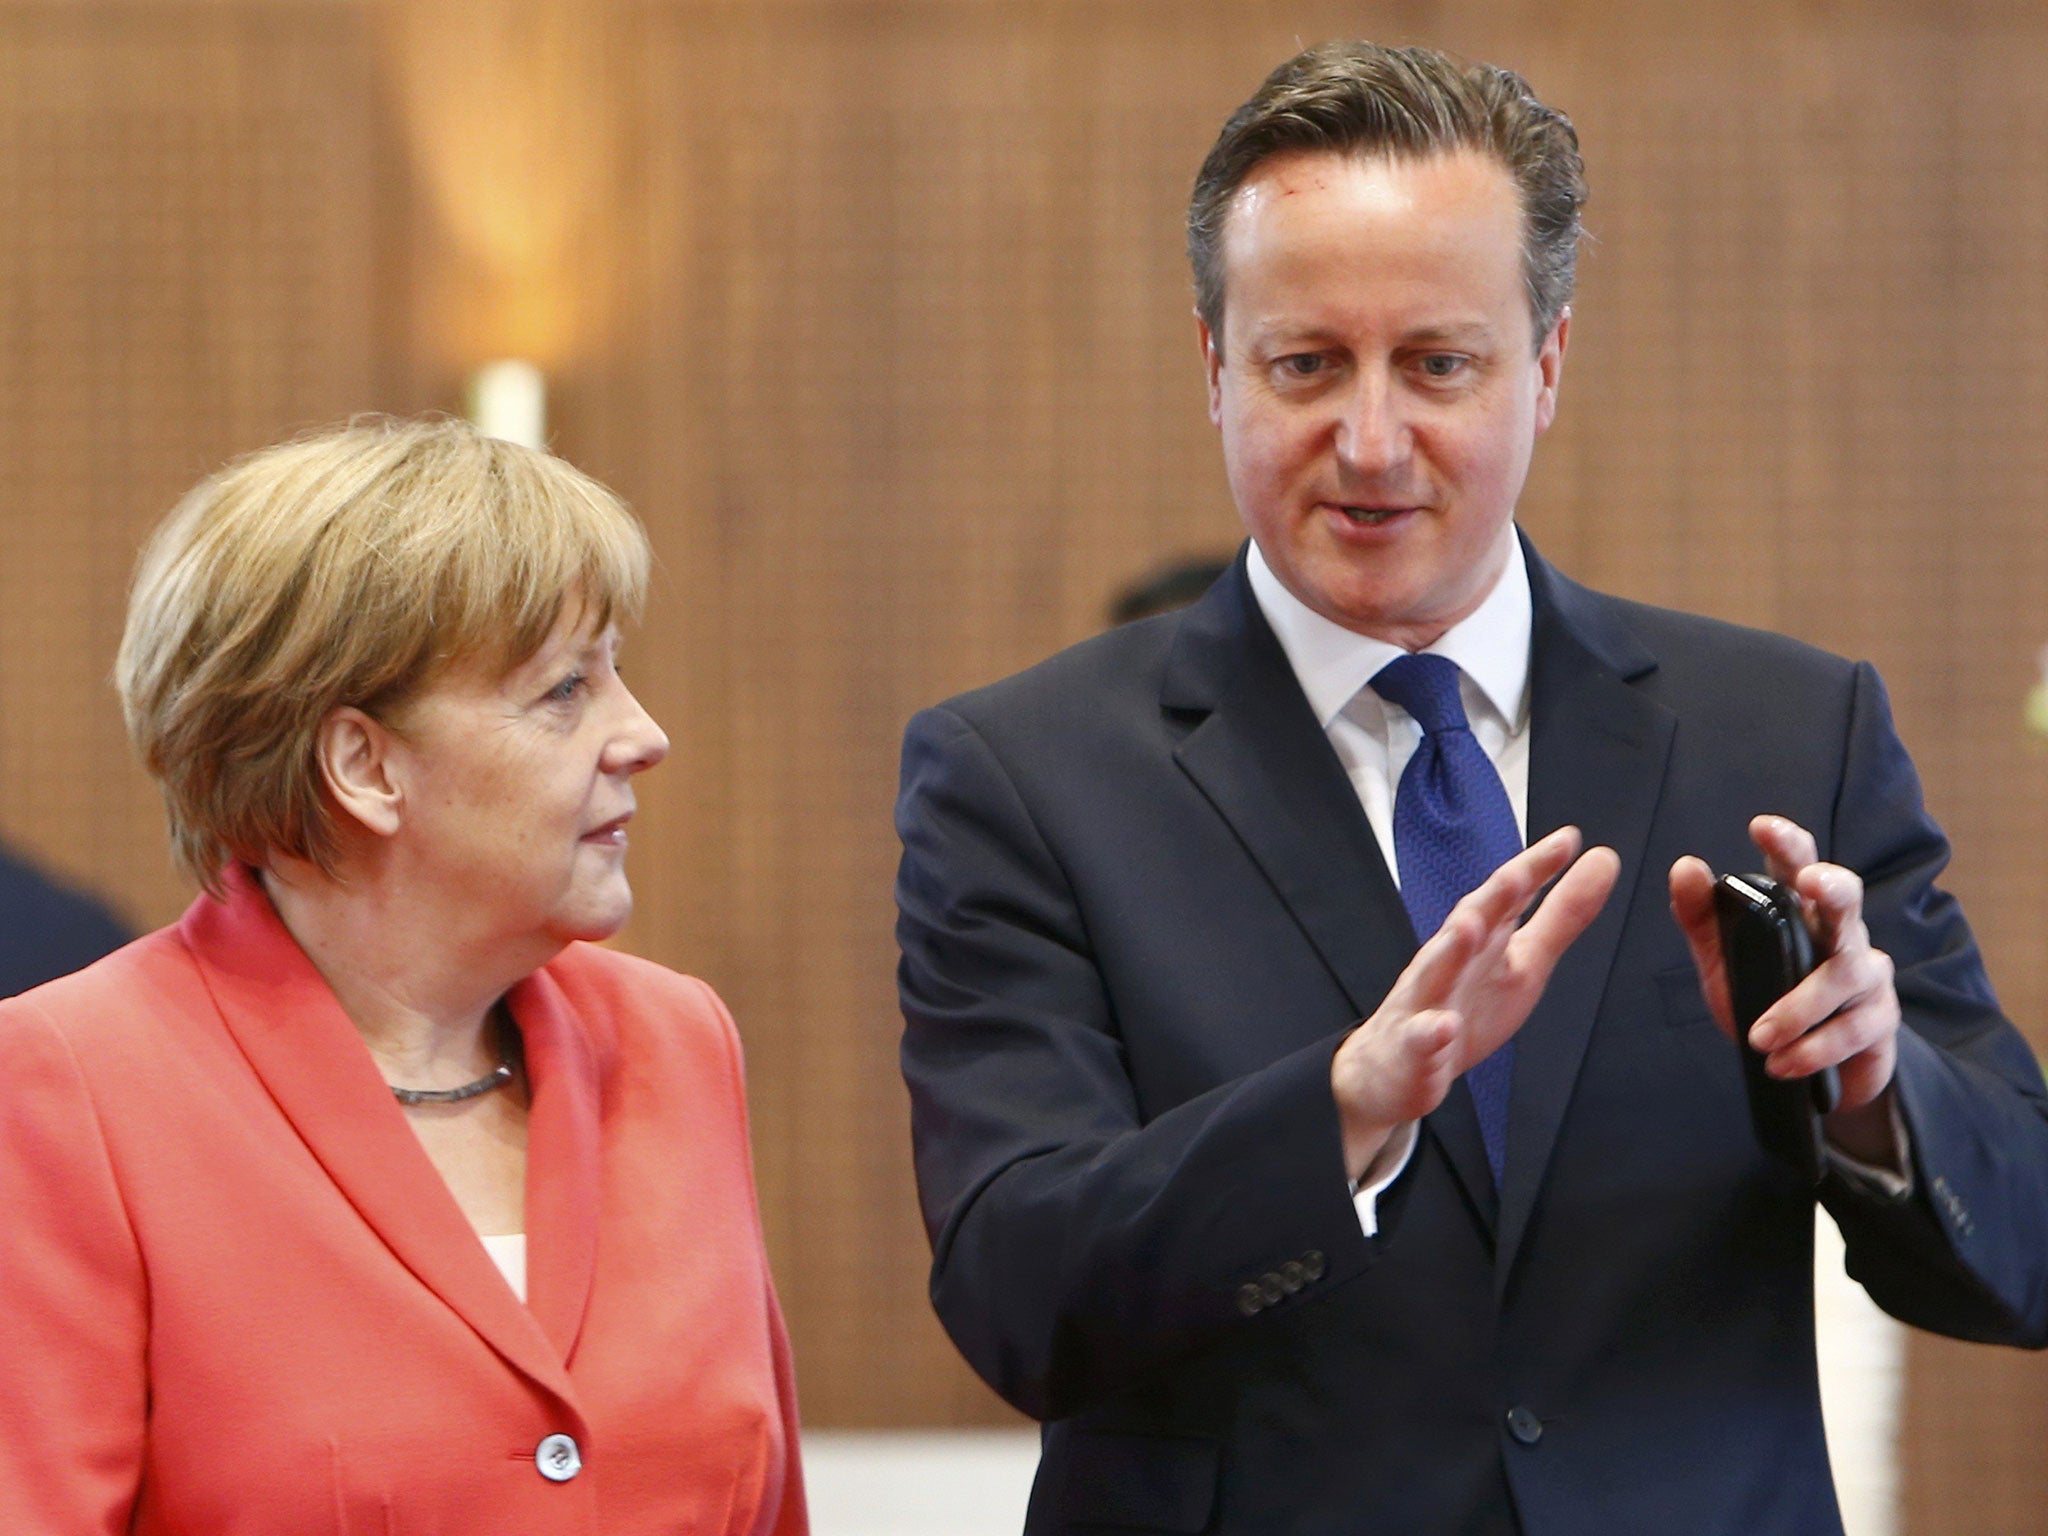 Angela Merkel chats with British Prime Minister David Cameron prior to a working meeting at the G7 summit in Germany on June 8, 2015